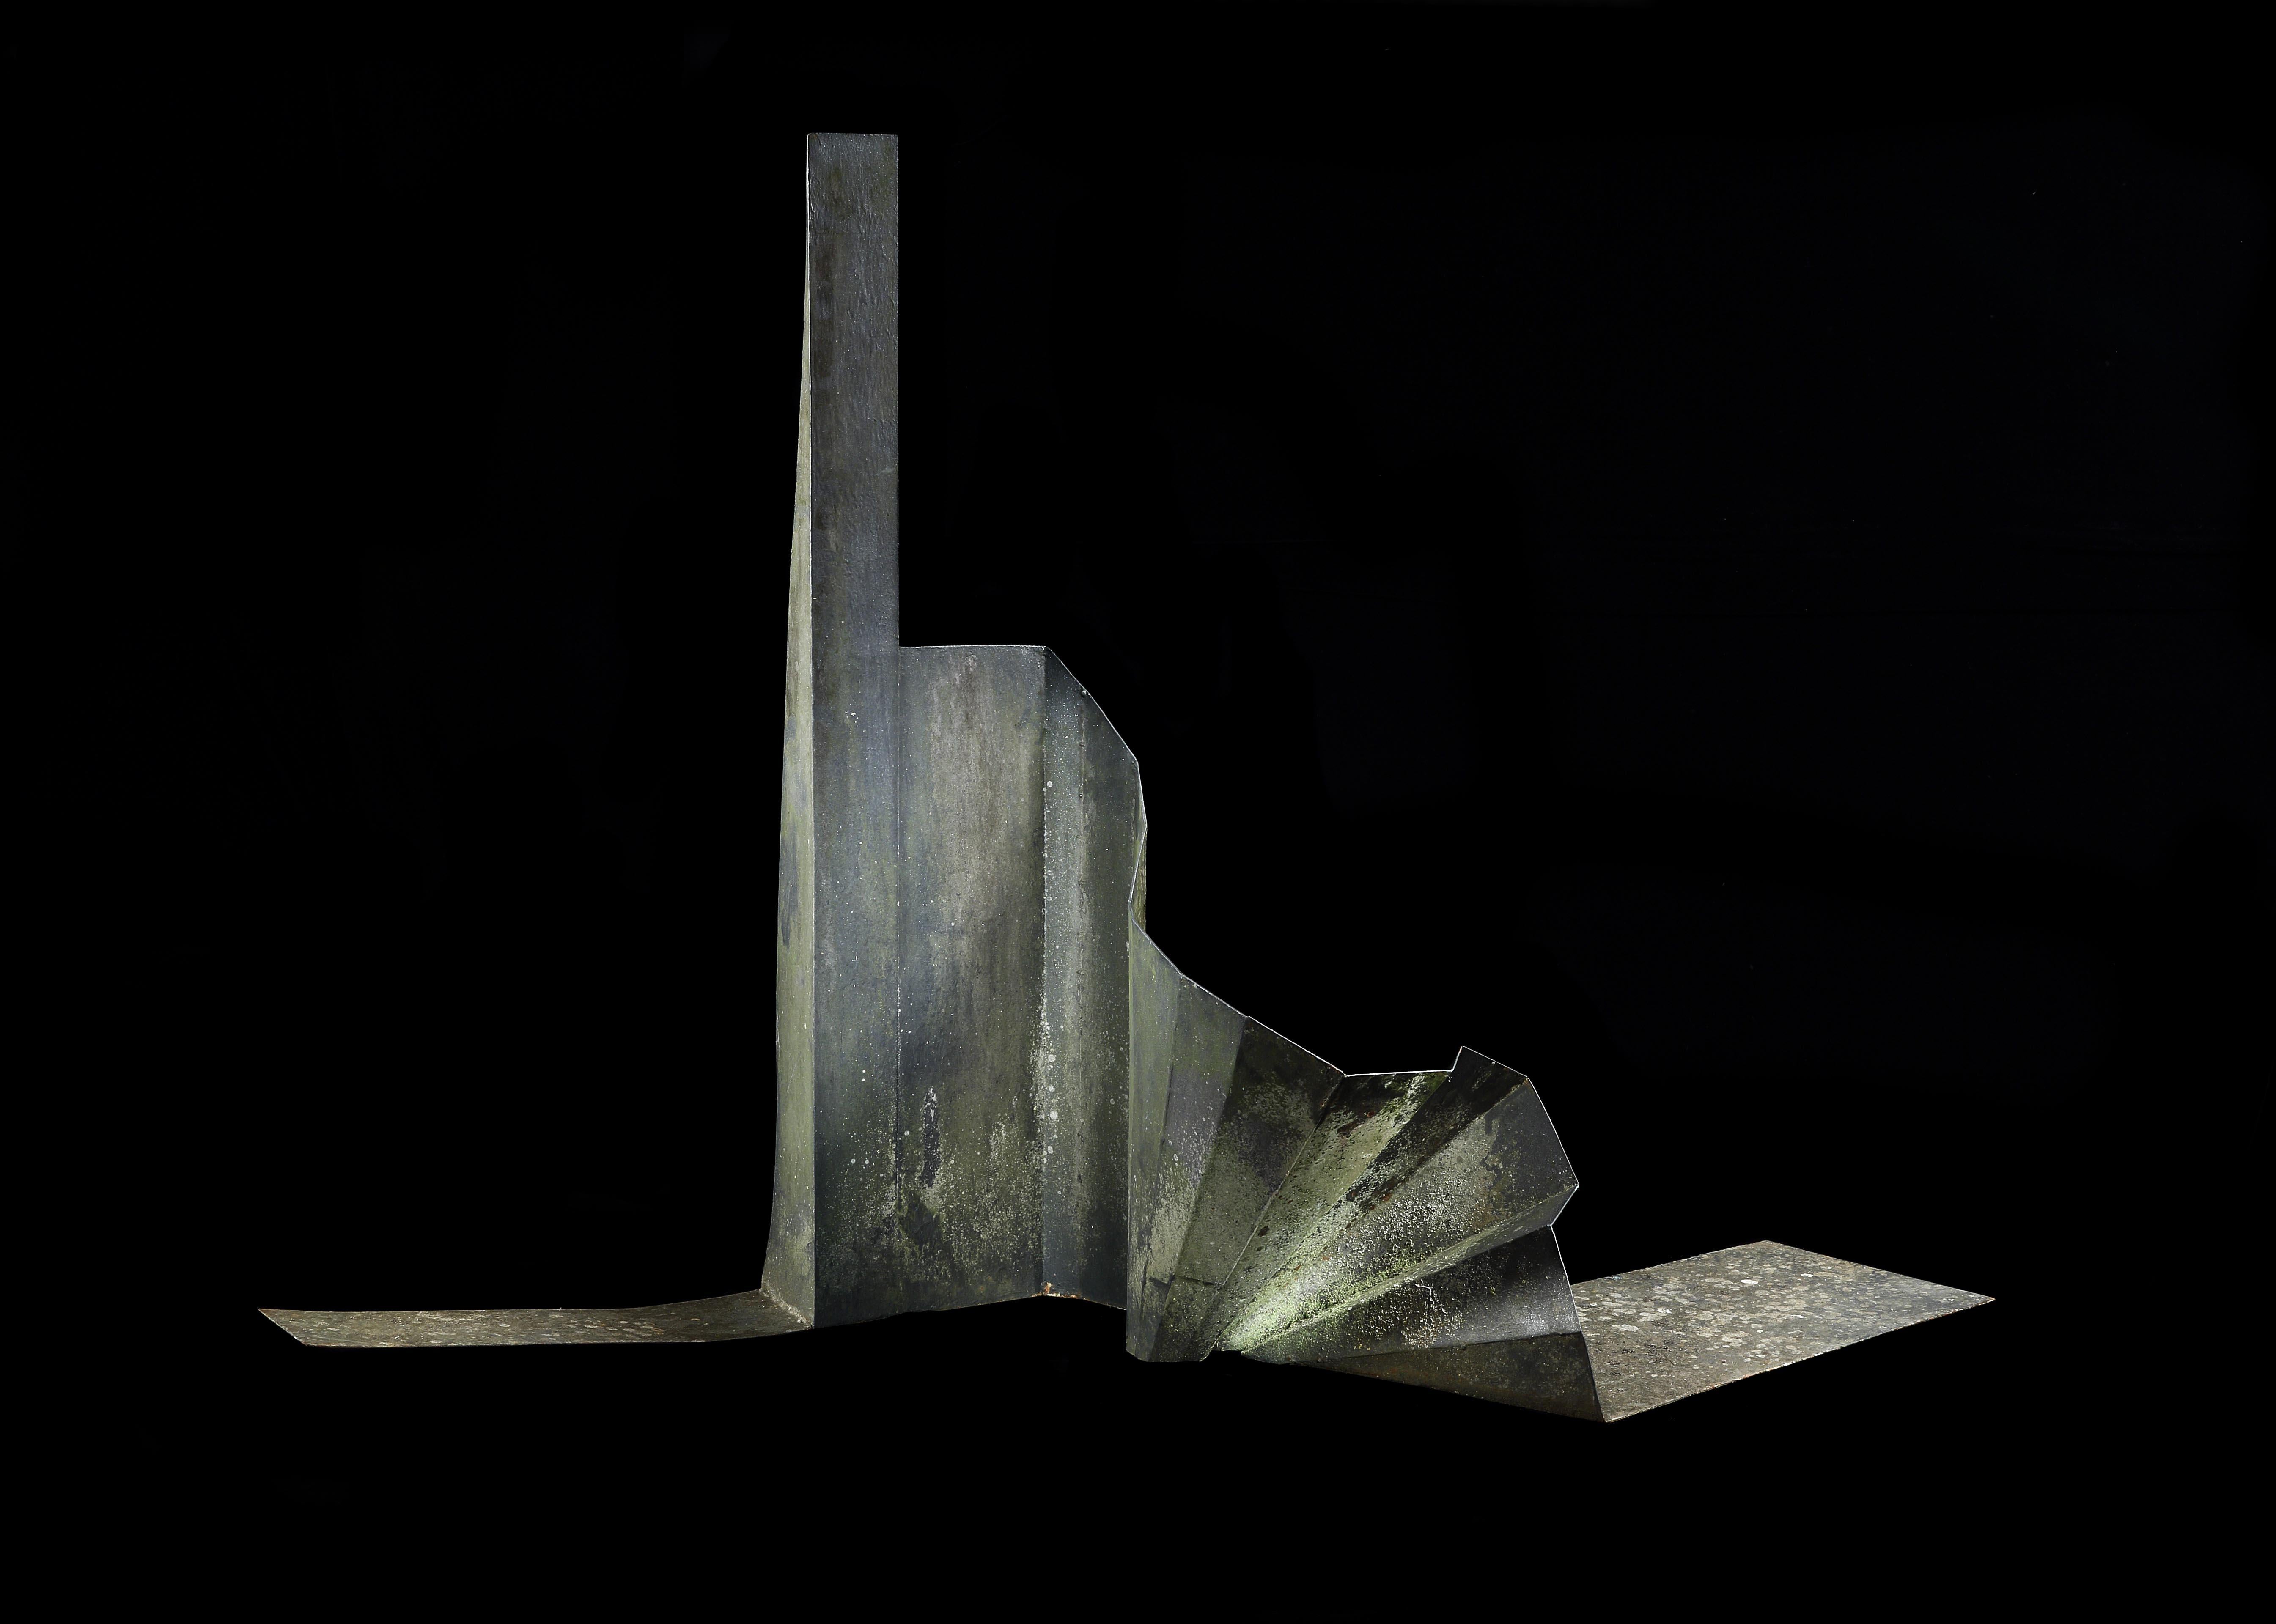 A massive, Mid-Century Modern, steel, abstract Expressionist, sculpture.

Striking sculpture displaying a sharp contrast between the fluid curling form and the rigid Industrial material presenting an active, changing, shifting form with momentum